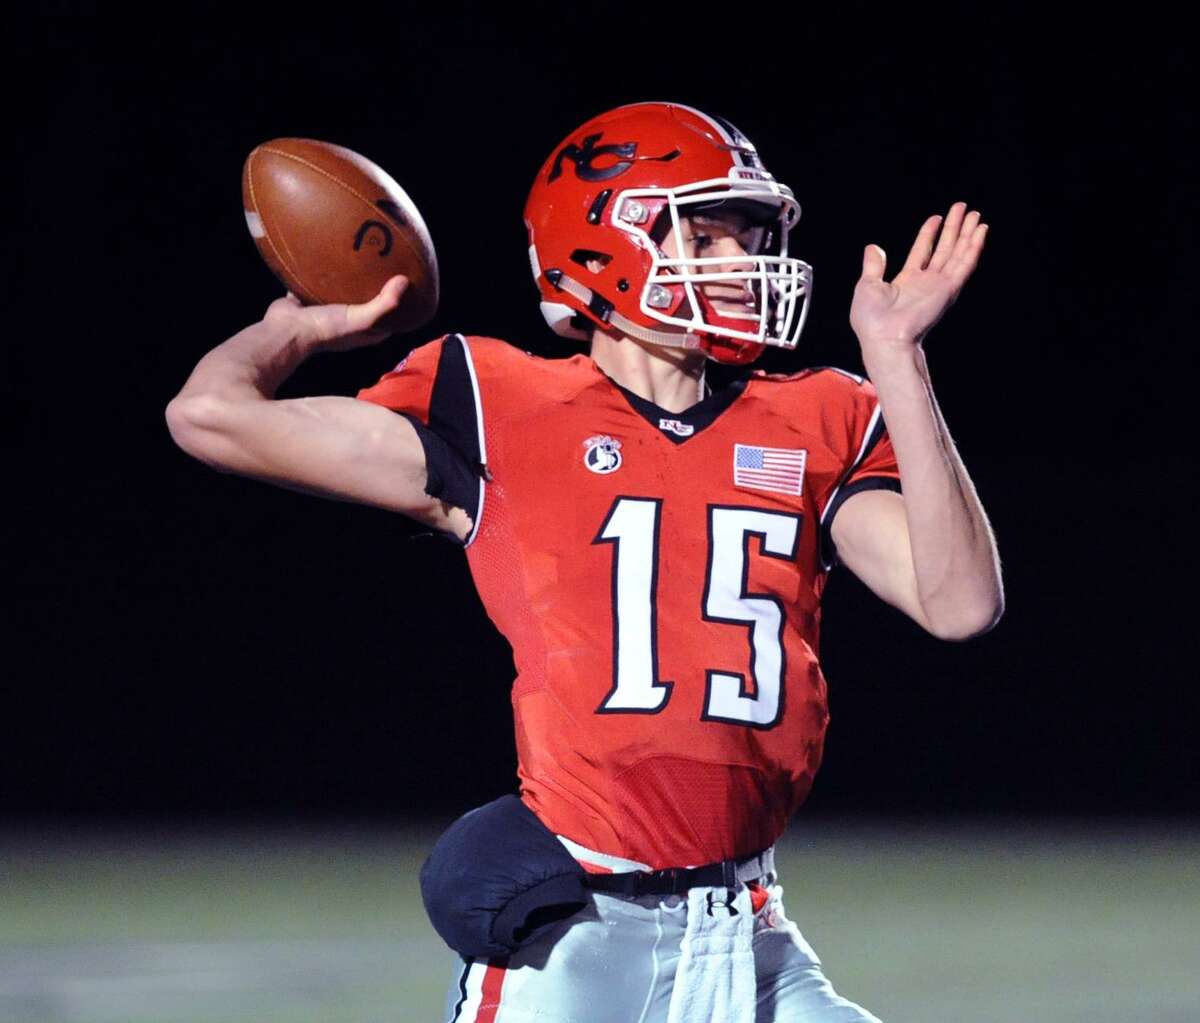 New Canaan quarterback Michael Collins (#15) during the high school football game between New Canaan High School and Fairfield Ludlowe High School at New Canaan, Conn., Friday night, Nov. 13, 2015.